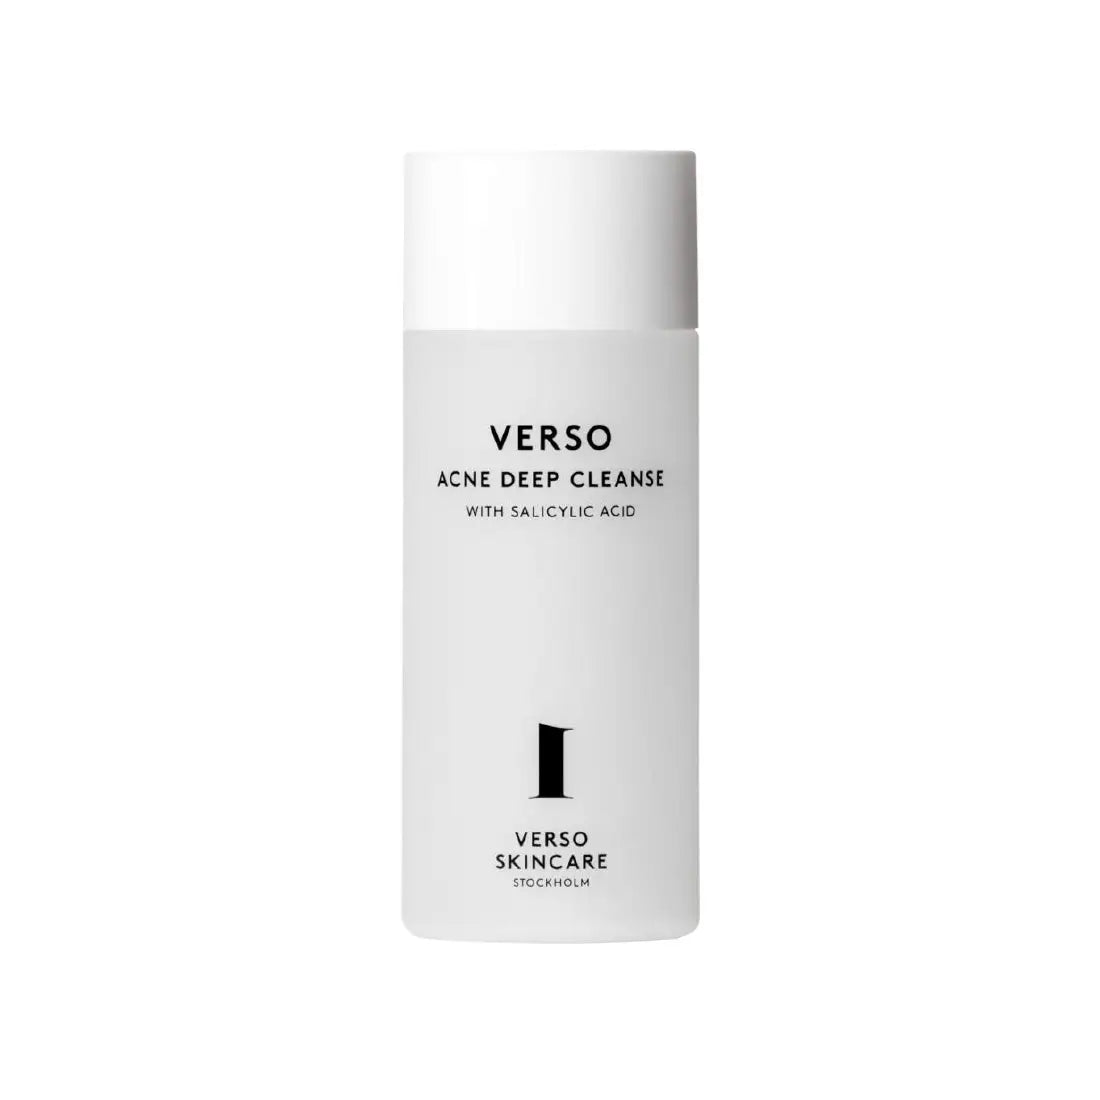 Verso Skincare N1 Acne Deep Cleanse 150ml - Free Shipping 